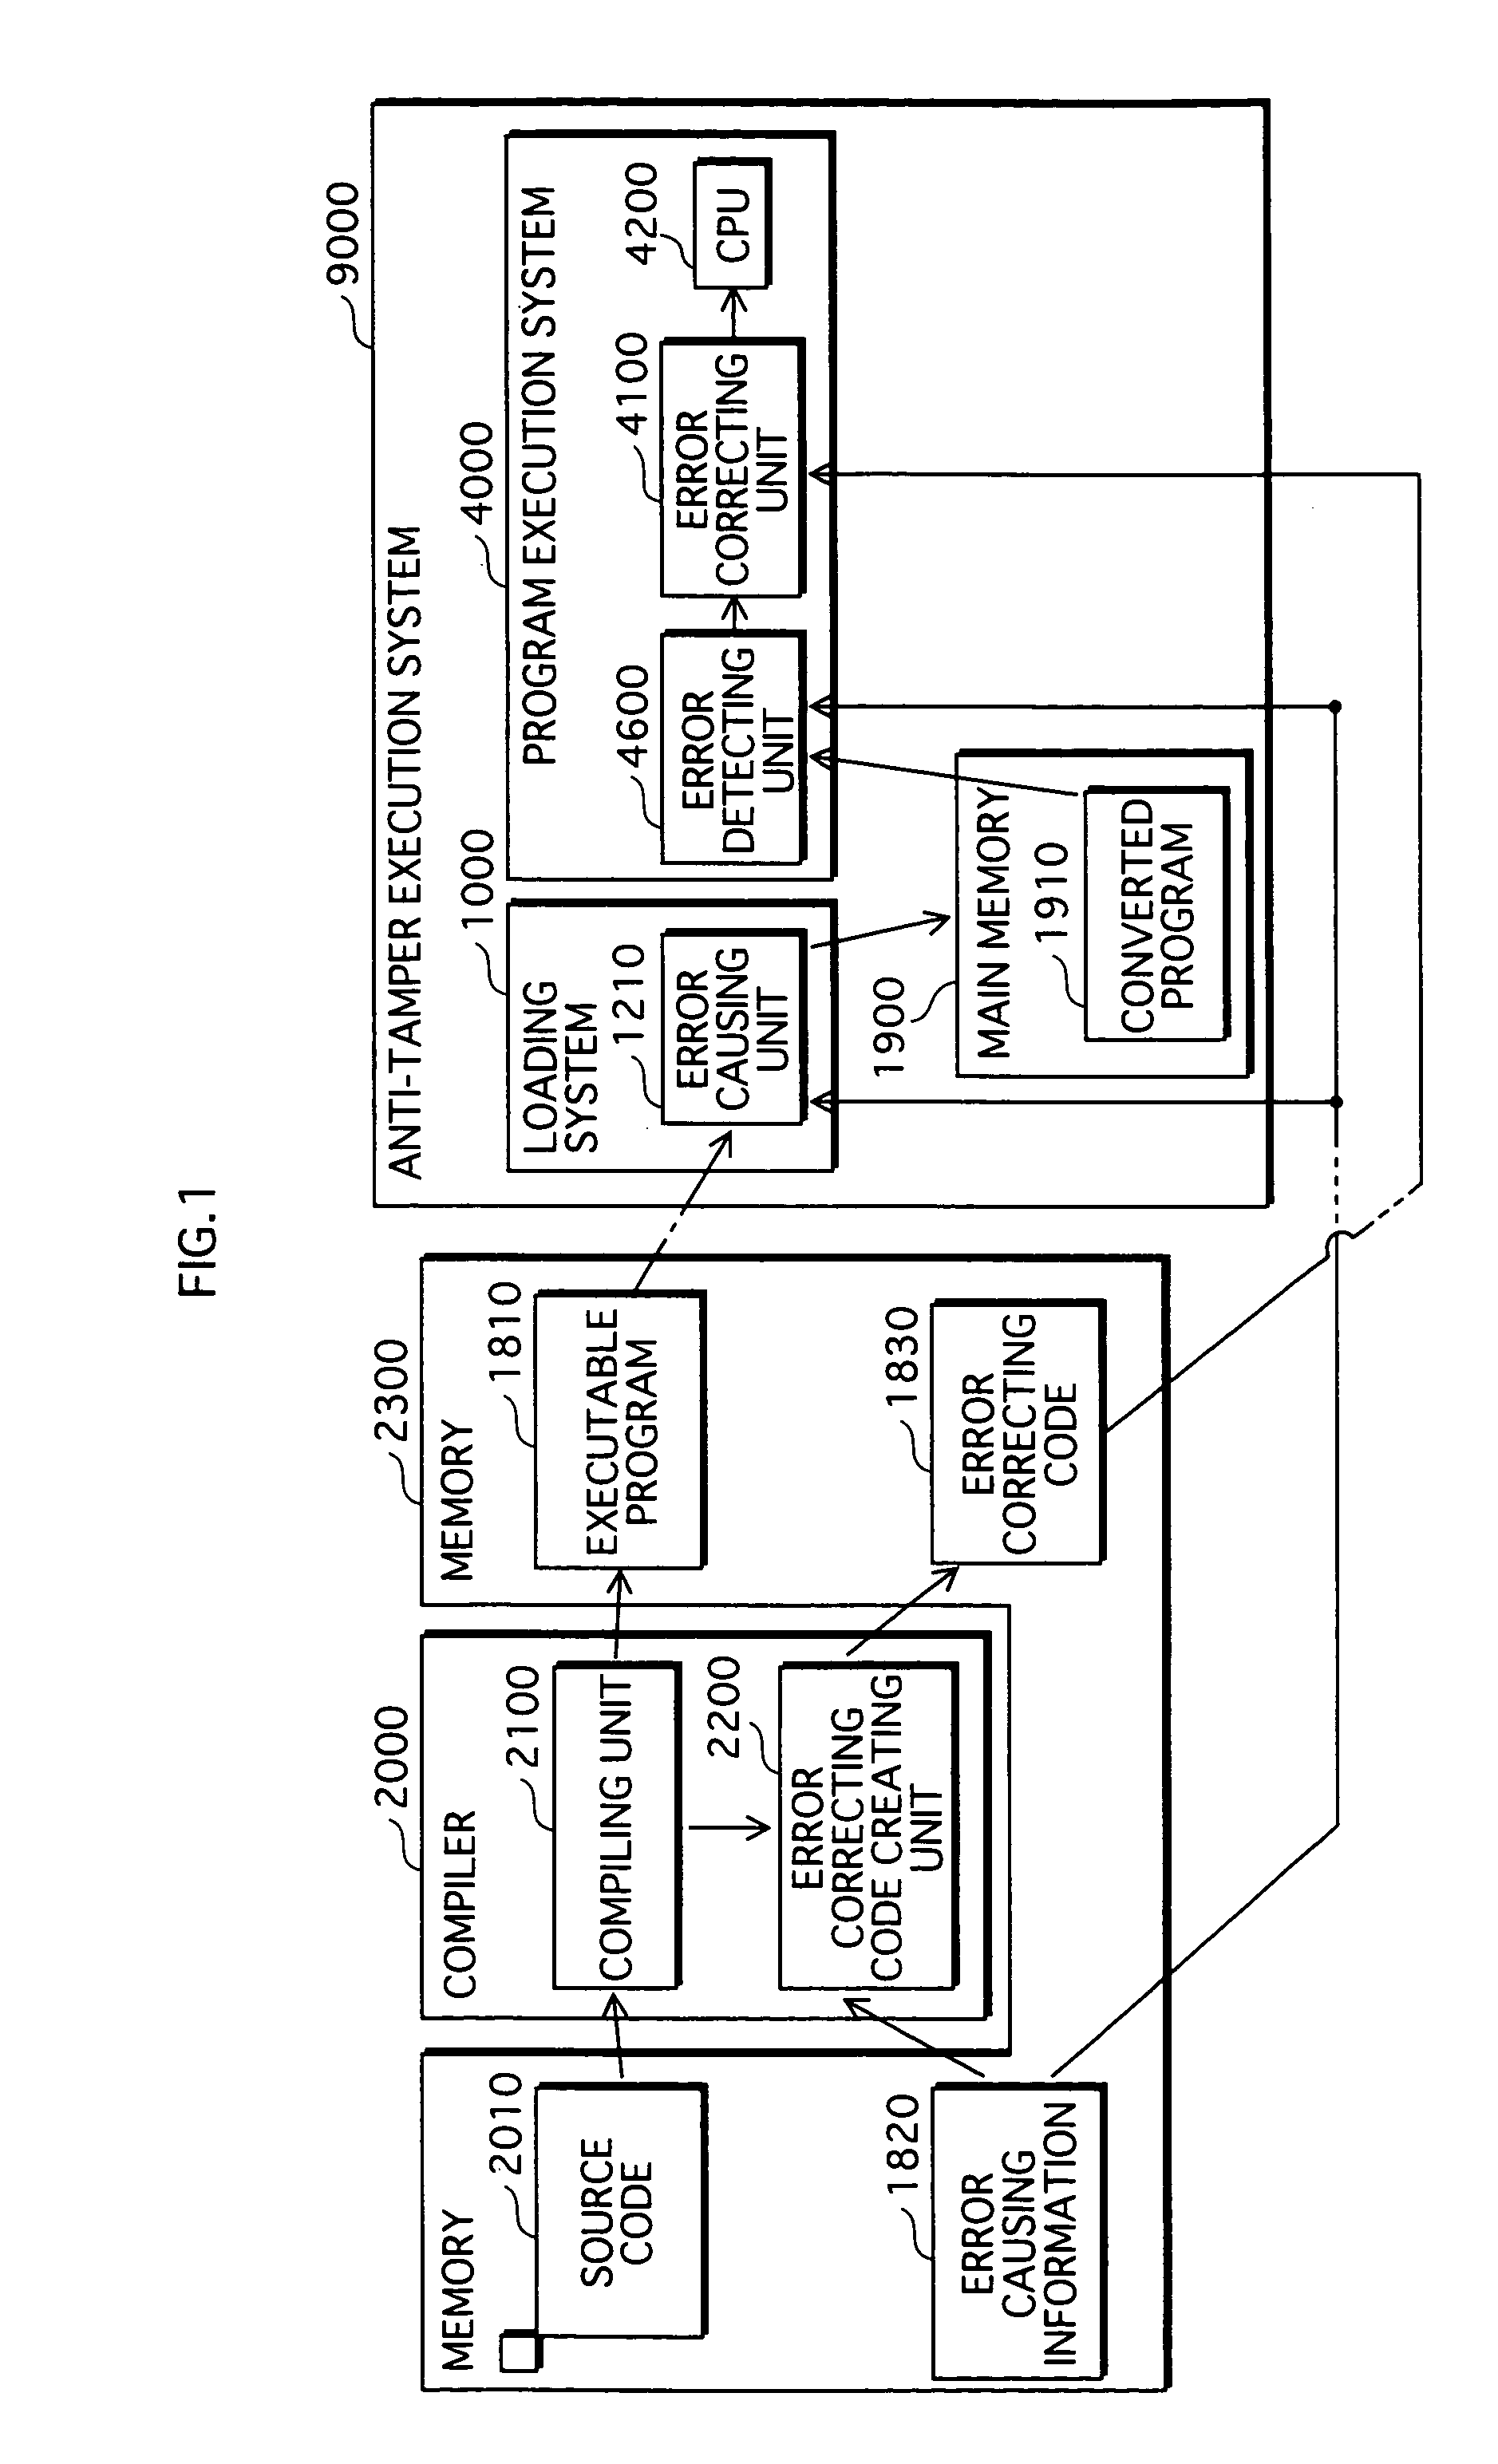 Data conversion system for protecting software against analysis and tampering